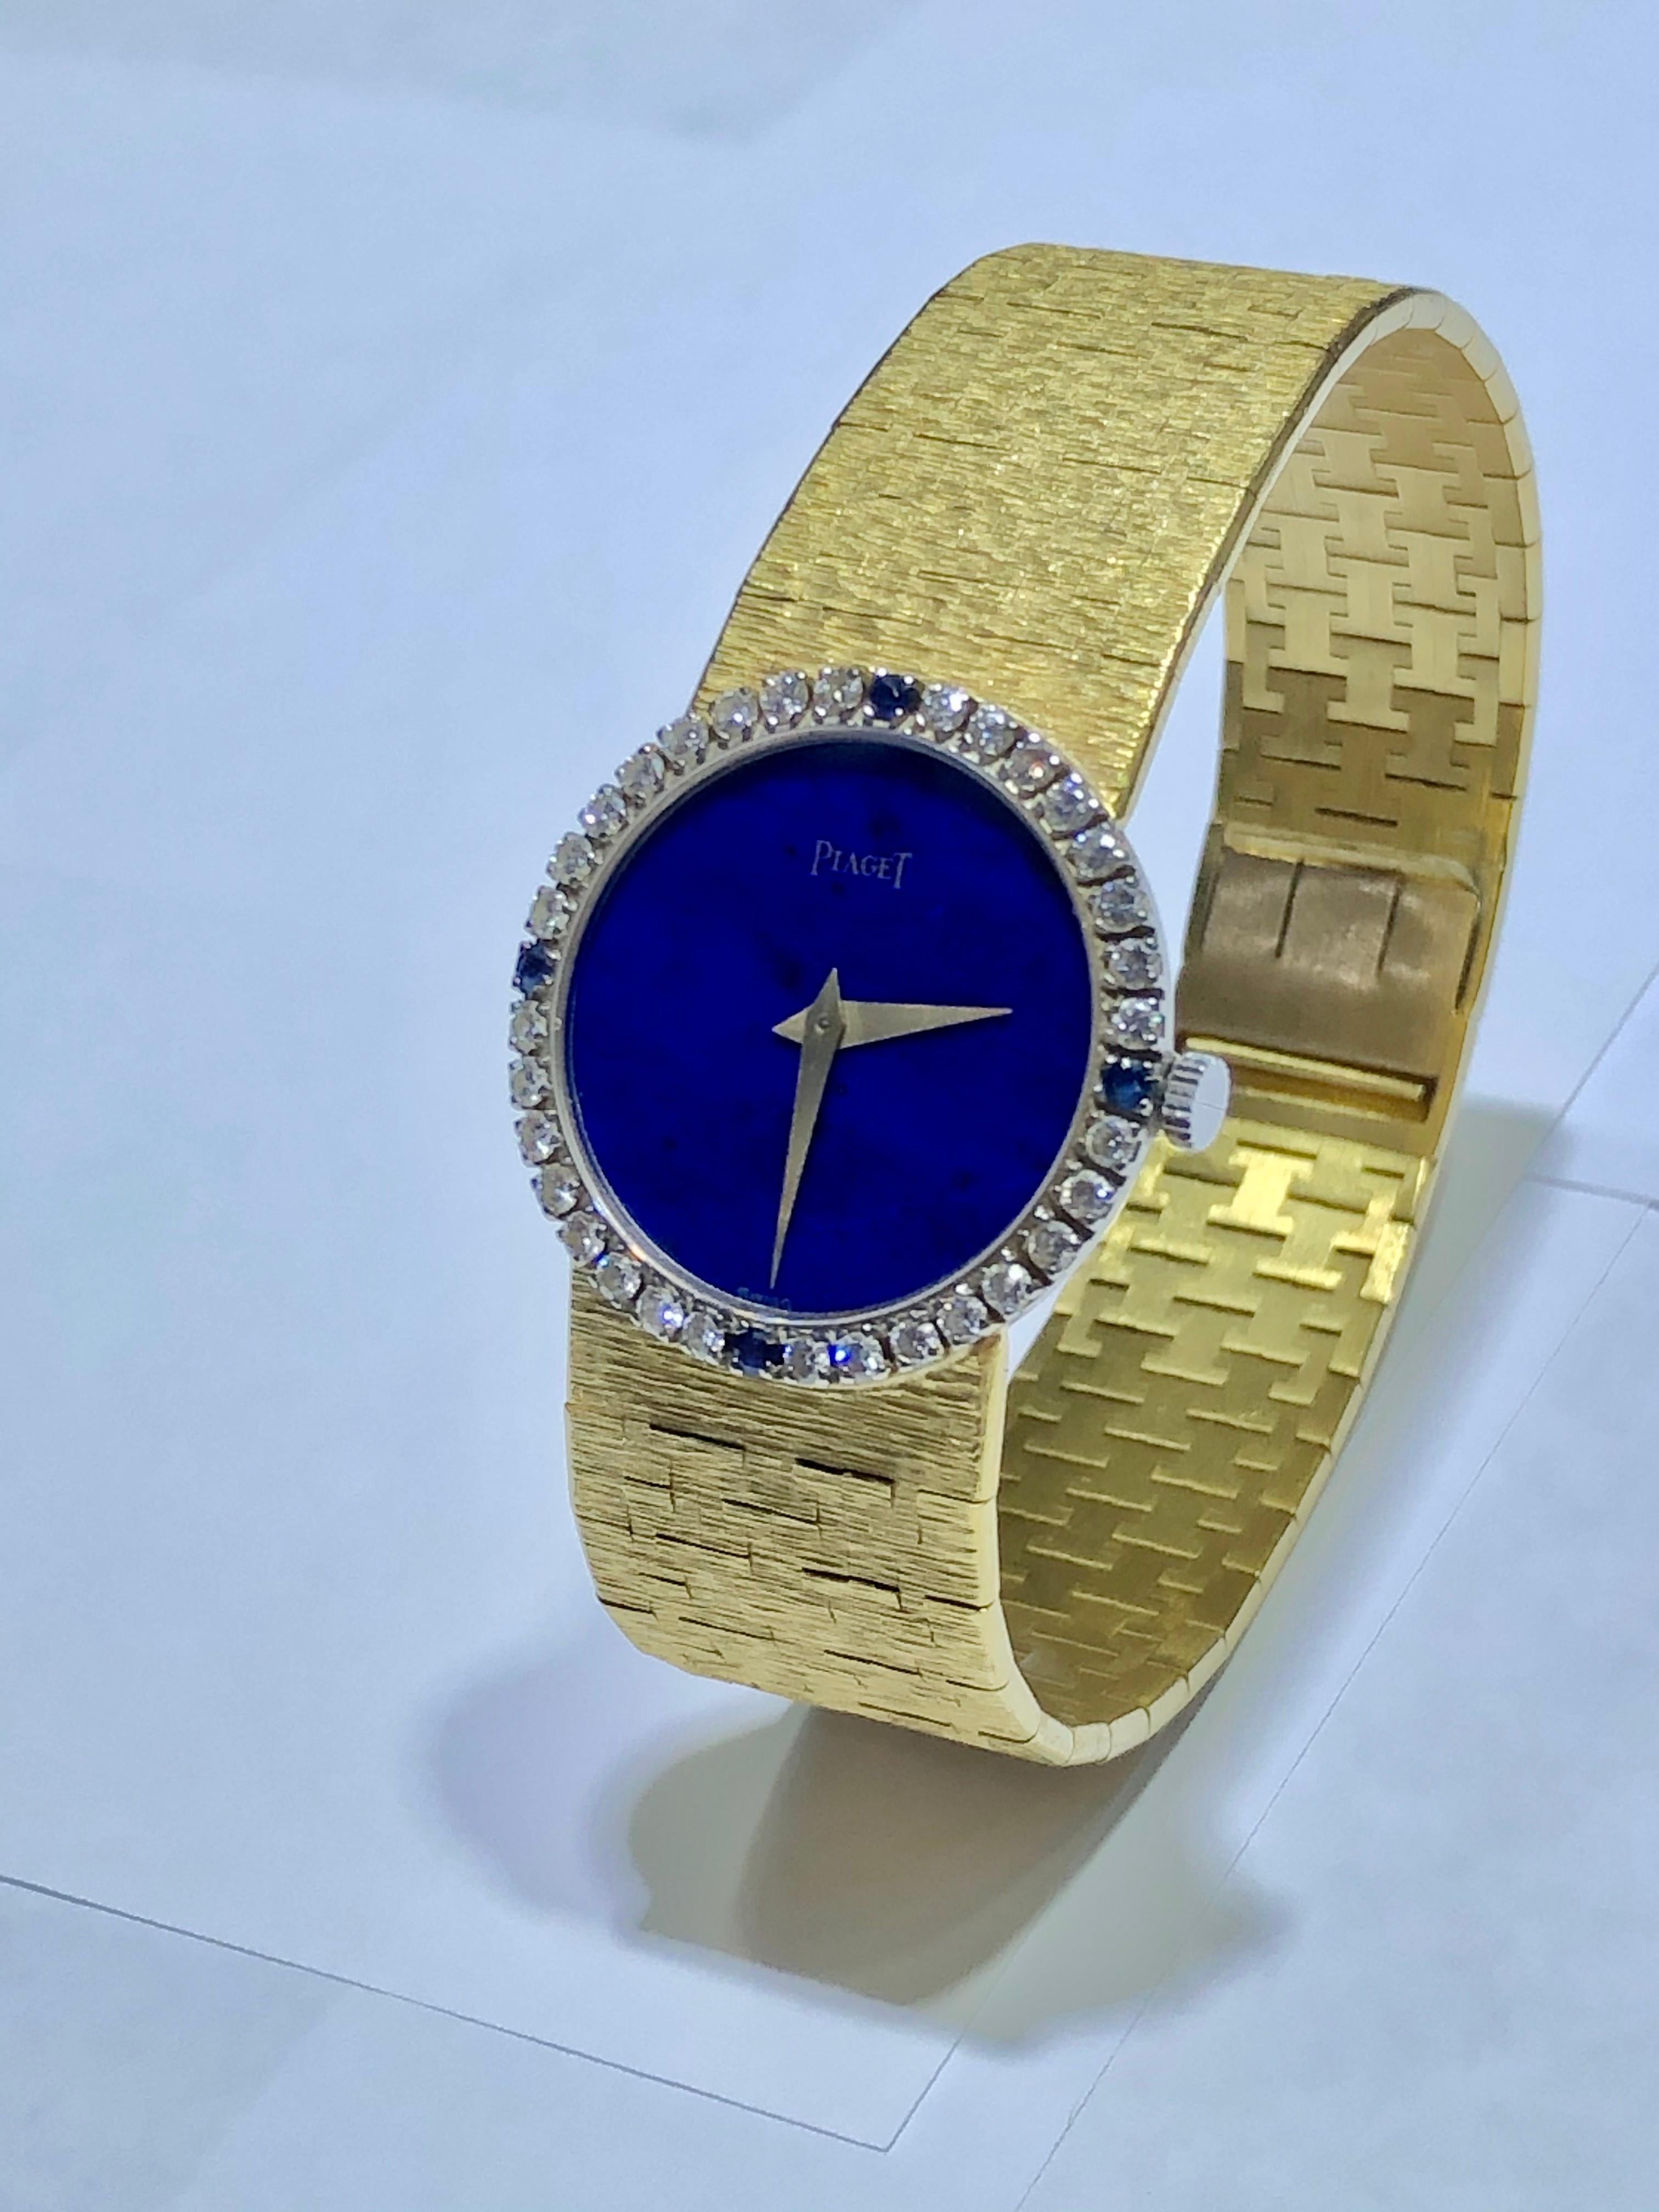 Ladies Piaget Classic in 18k yellow gold with diamond and sapphire bezel and lapis lazuli dial. Manual. Ref 9706A6. Fine Pre-owned Piaget Watch.

Piaget Classic 9706A6 watch is made out of yellow gold on a 18k yellow gold bracelet with a 18k yellow